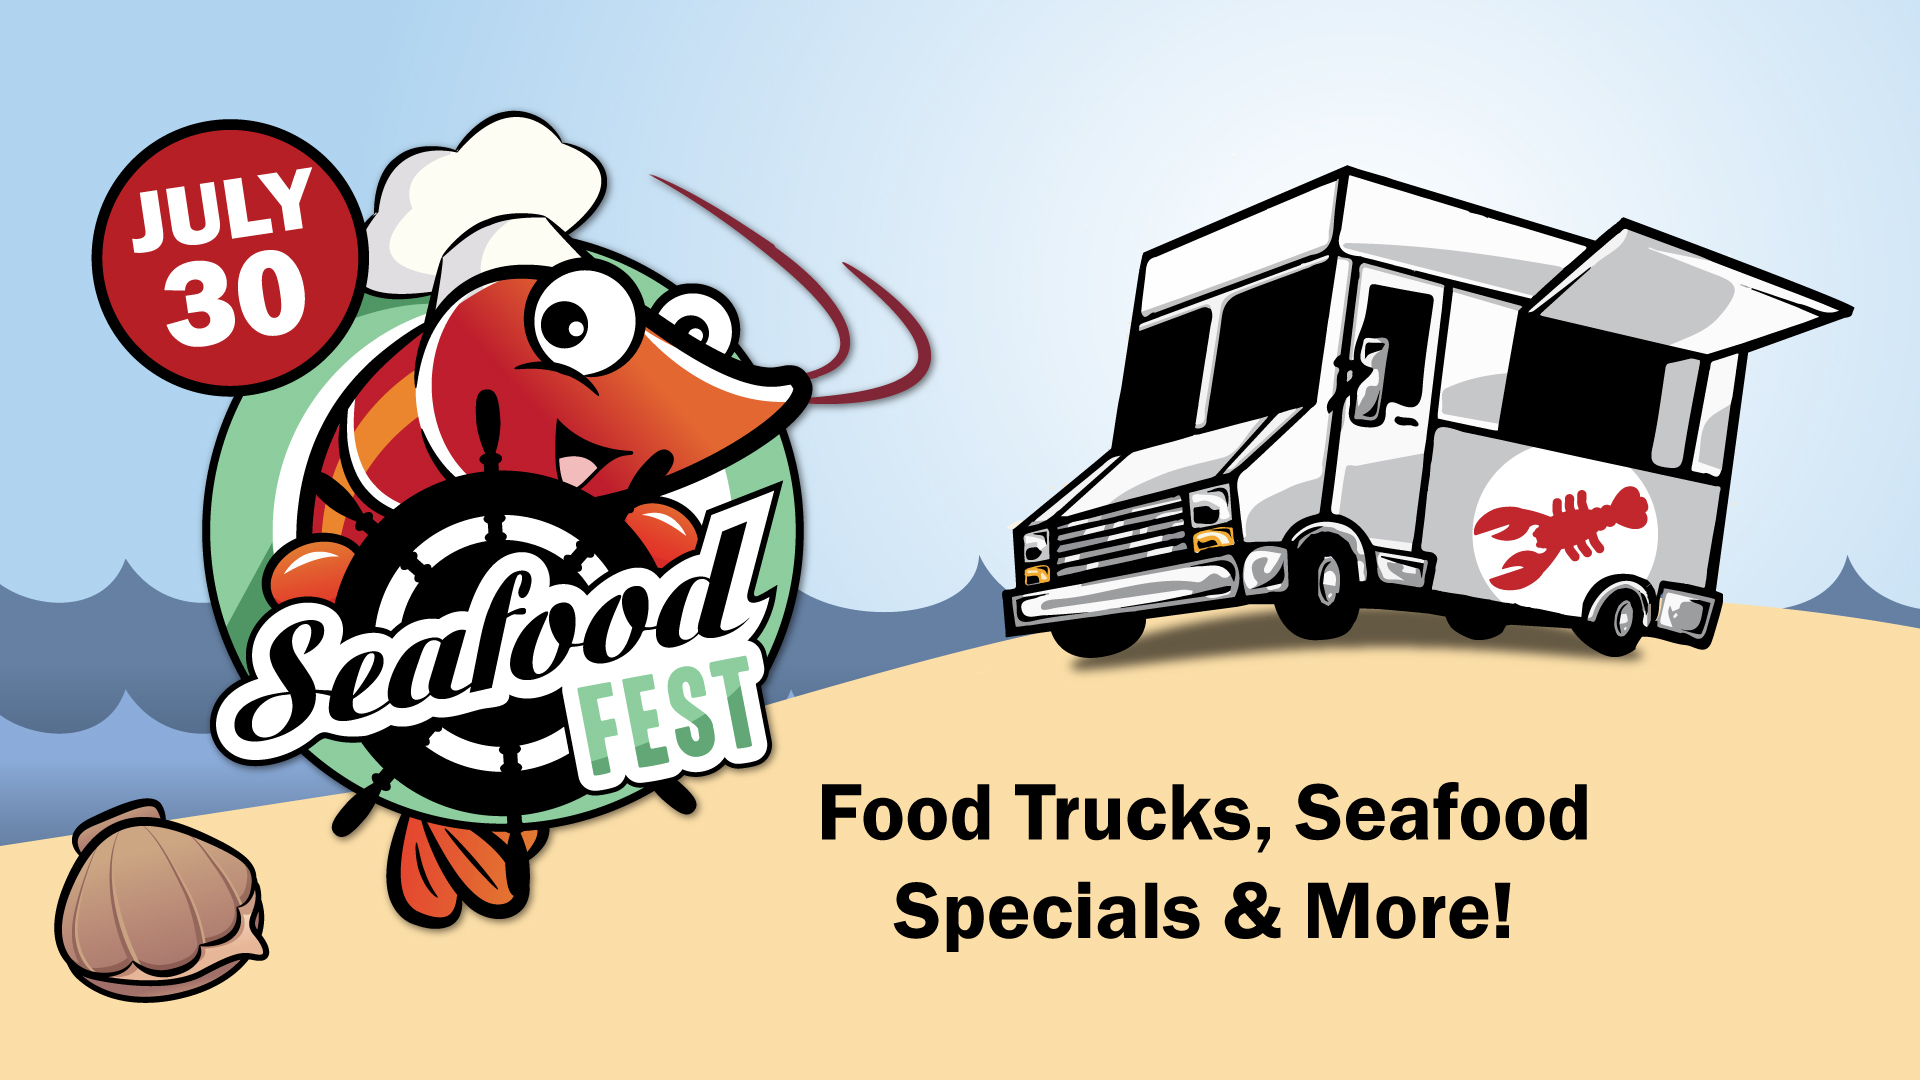 Meadowlands Racing on Twitter "The always popular Seafood Festival is